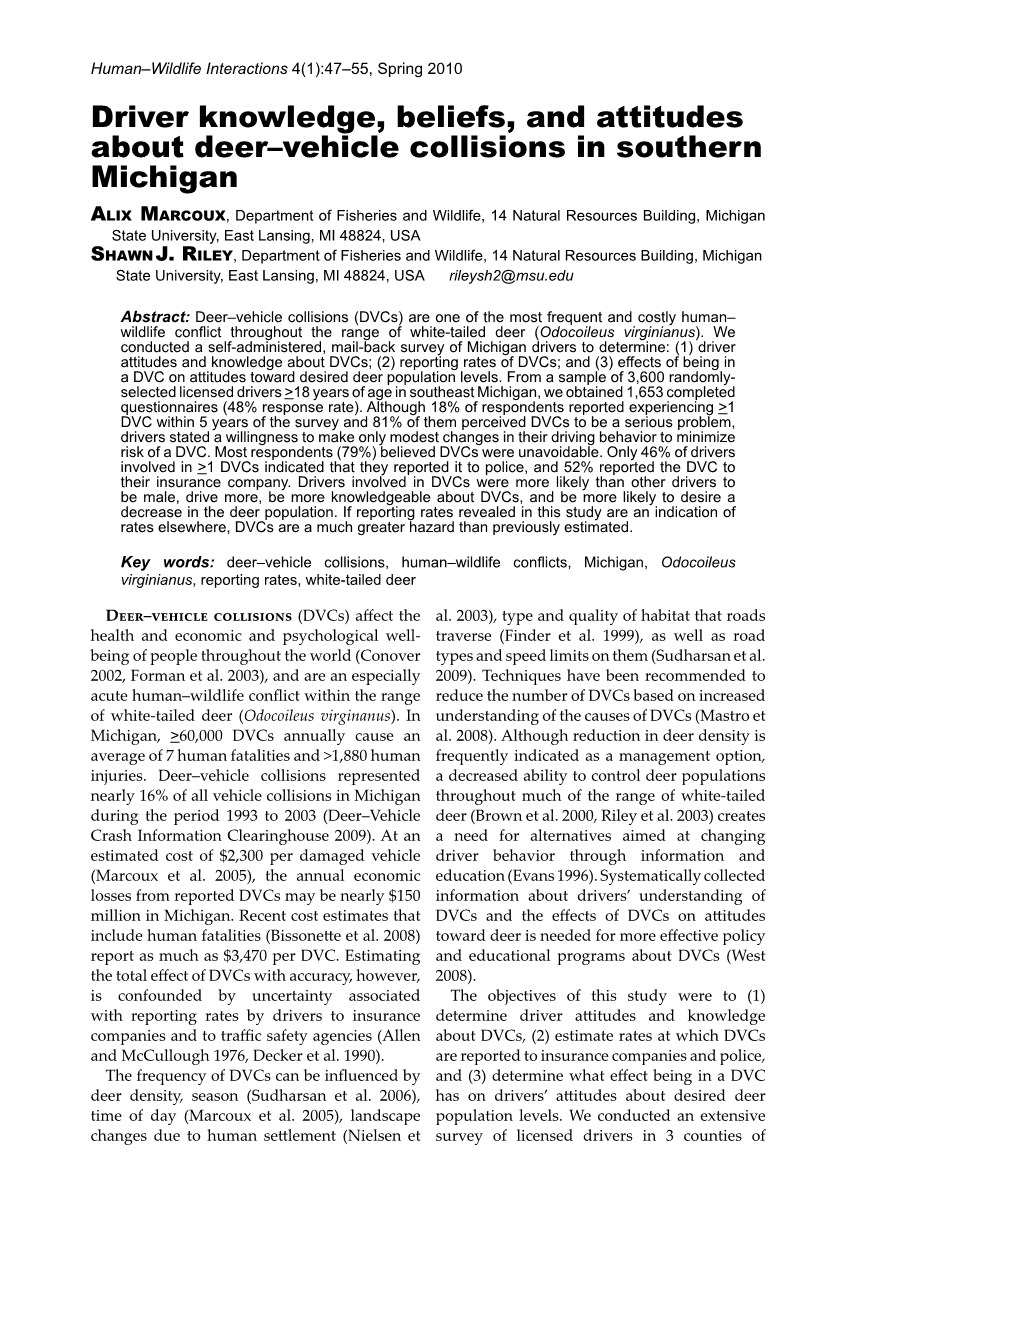 Driver Knowledge, Beliefs, and Attitudes About Deer–Vehicle Collisions in Southern Michigan